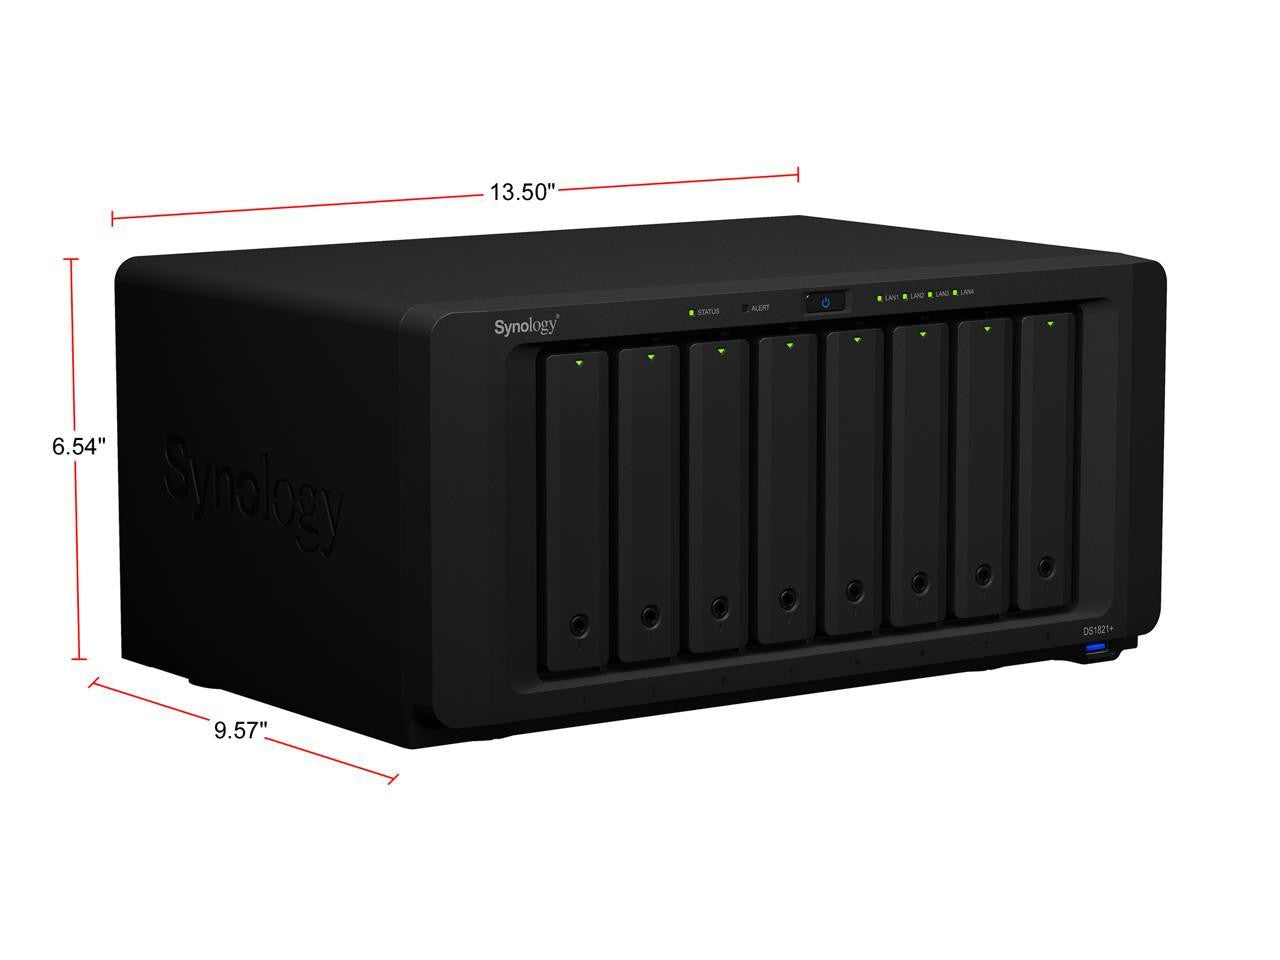 Synology DS1821+ 8-BAY DiskStation with 16GB RAM, 1.6TB (2x800GB) Cache and 96TB (8 x 12TB) of Synology Enterprise HAT5300 Drives Fully Assembled and Tested